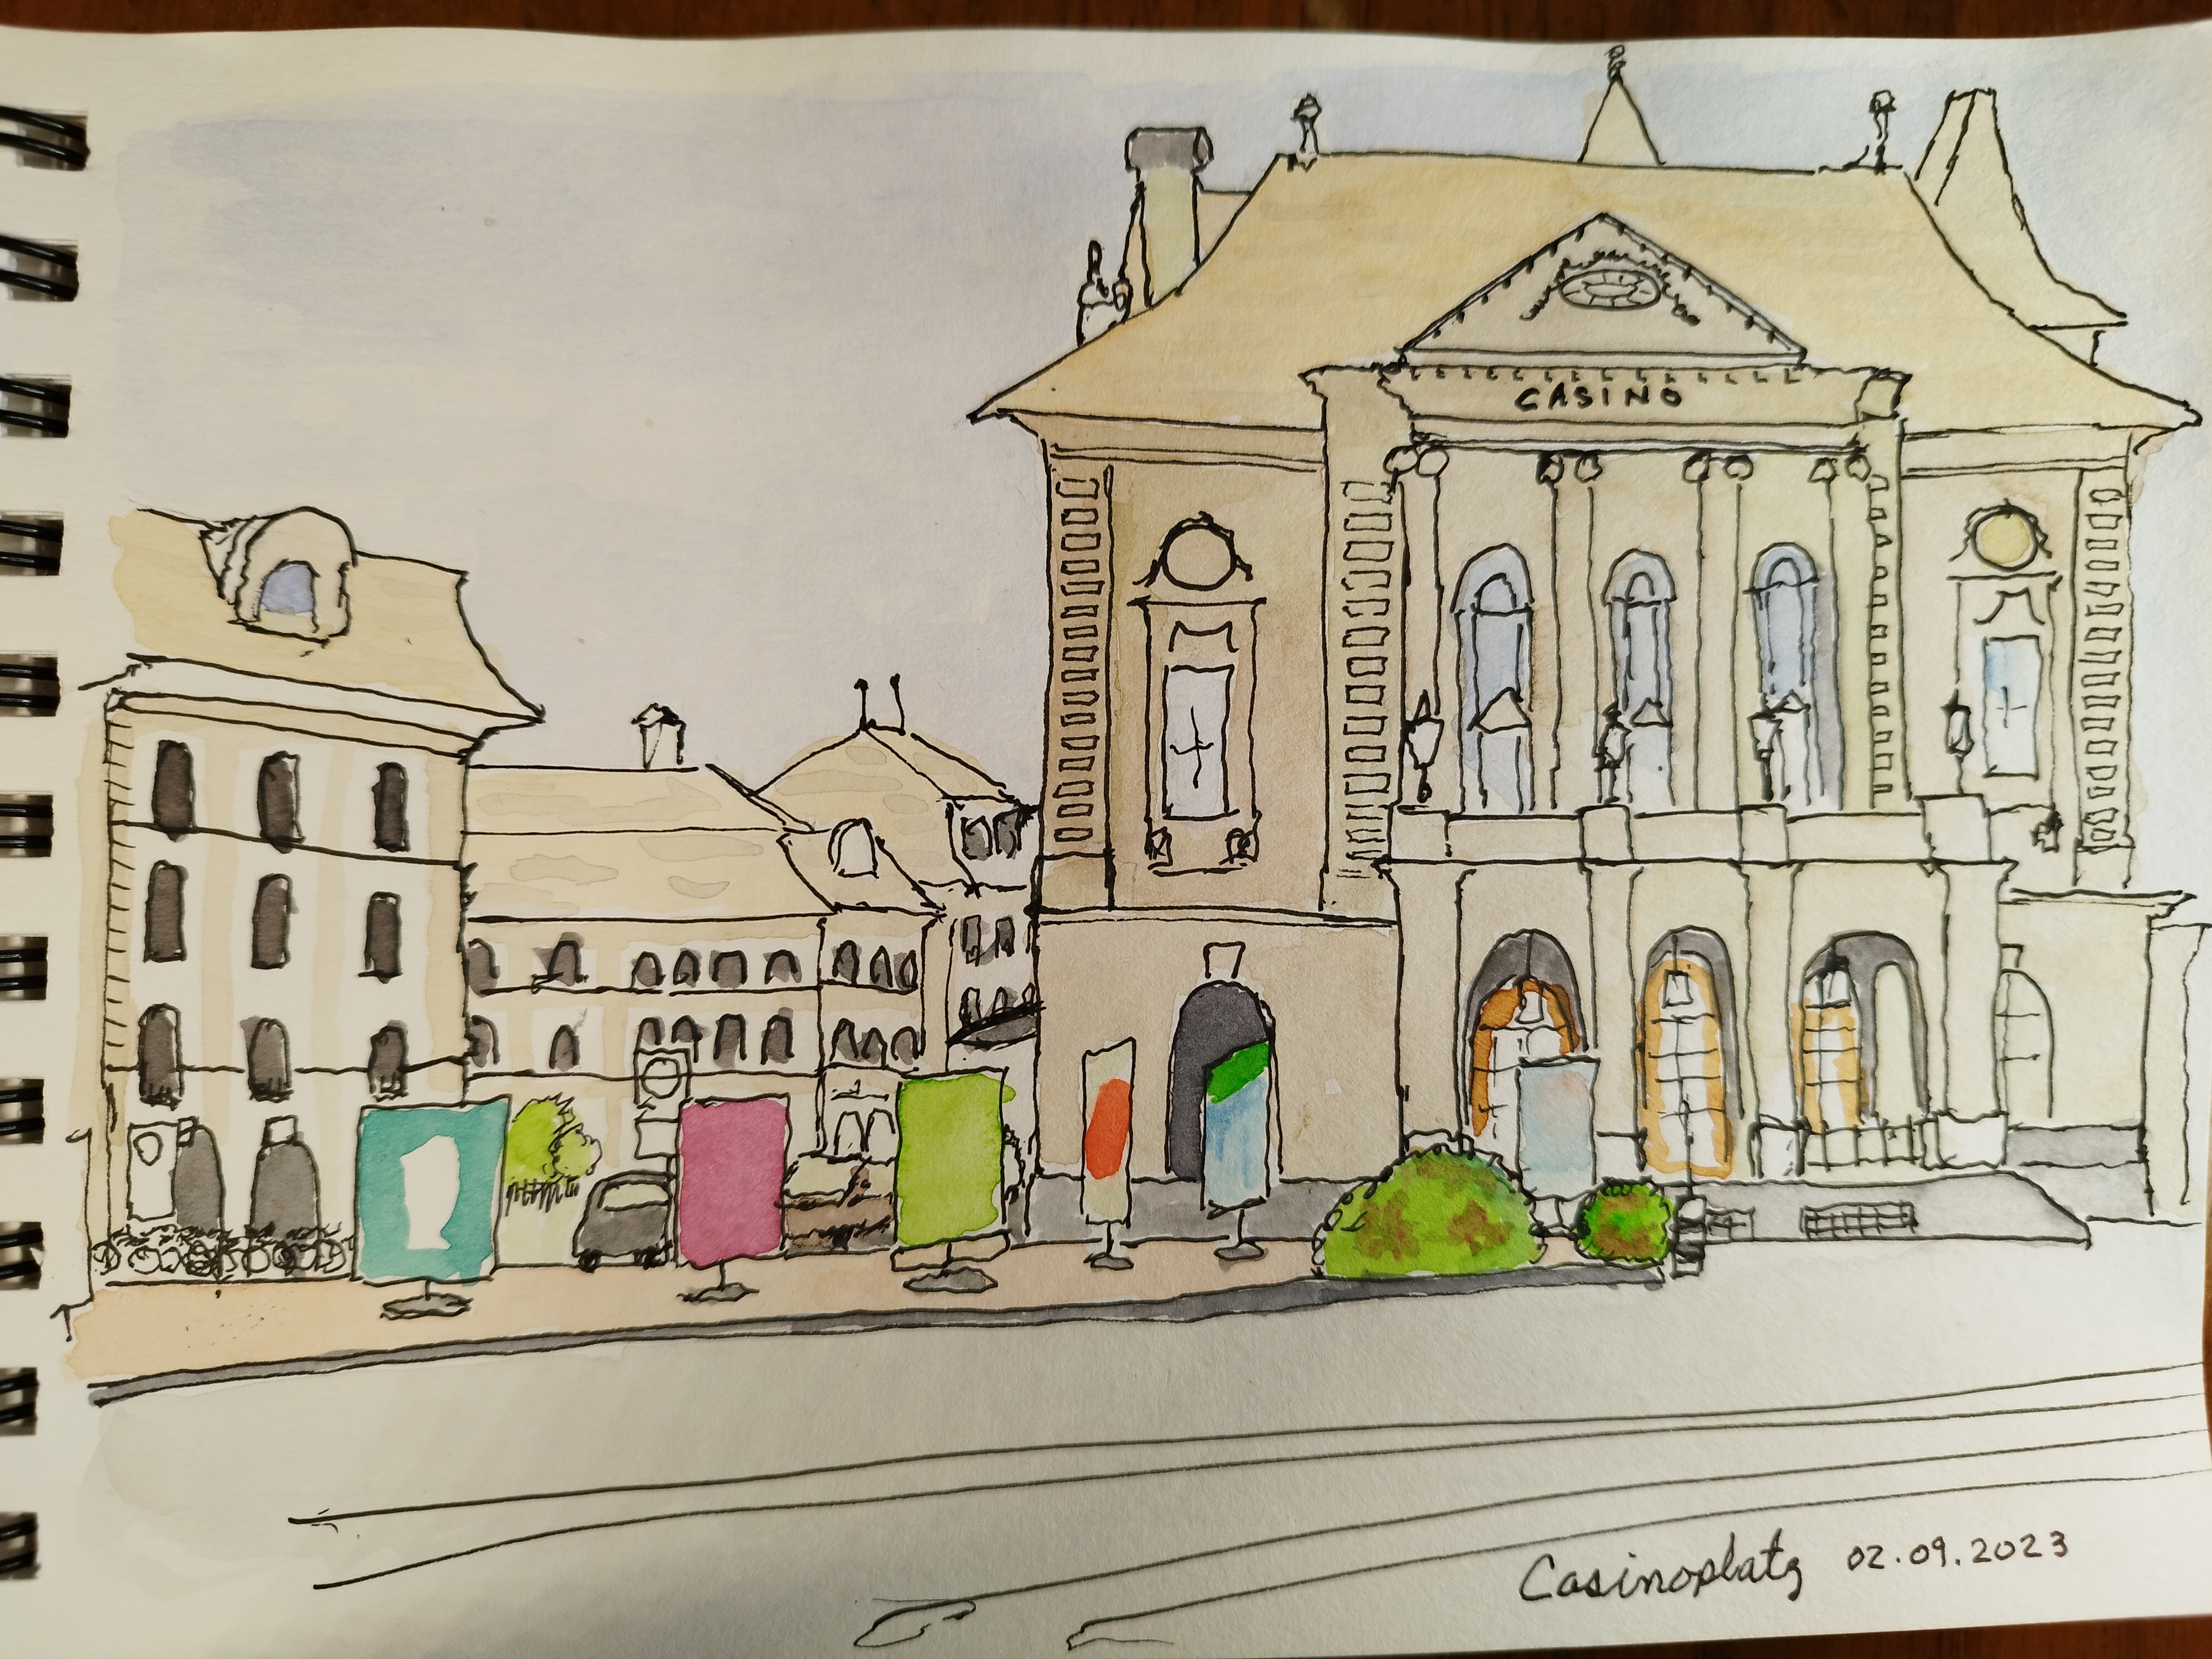 watercolour and fineliner of the Casinoplatz in Bern - showing the Casino and Burgerbibliotek